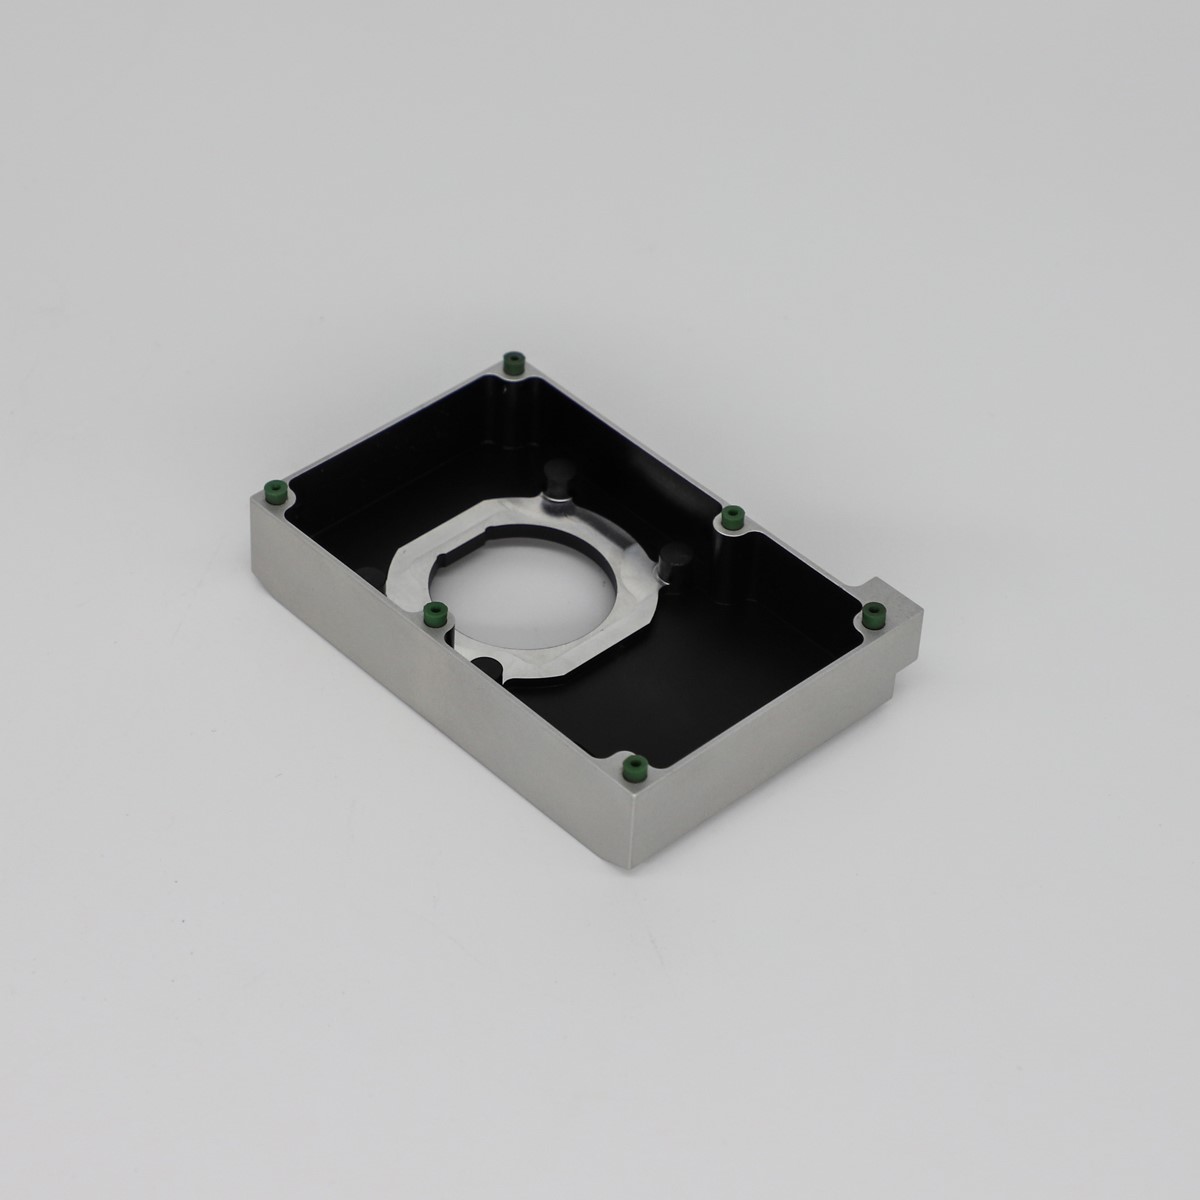 Xavier professional cnc camera housing parts excellent quality from top factory-1